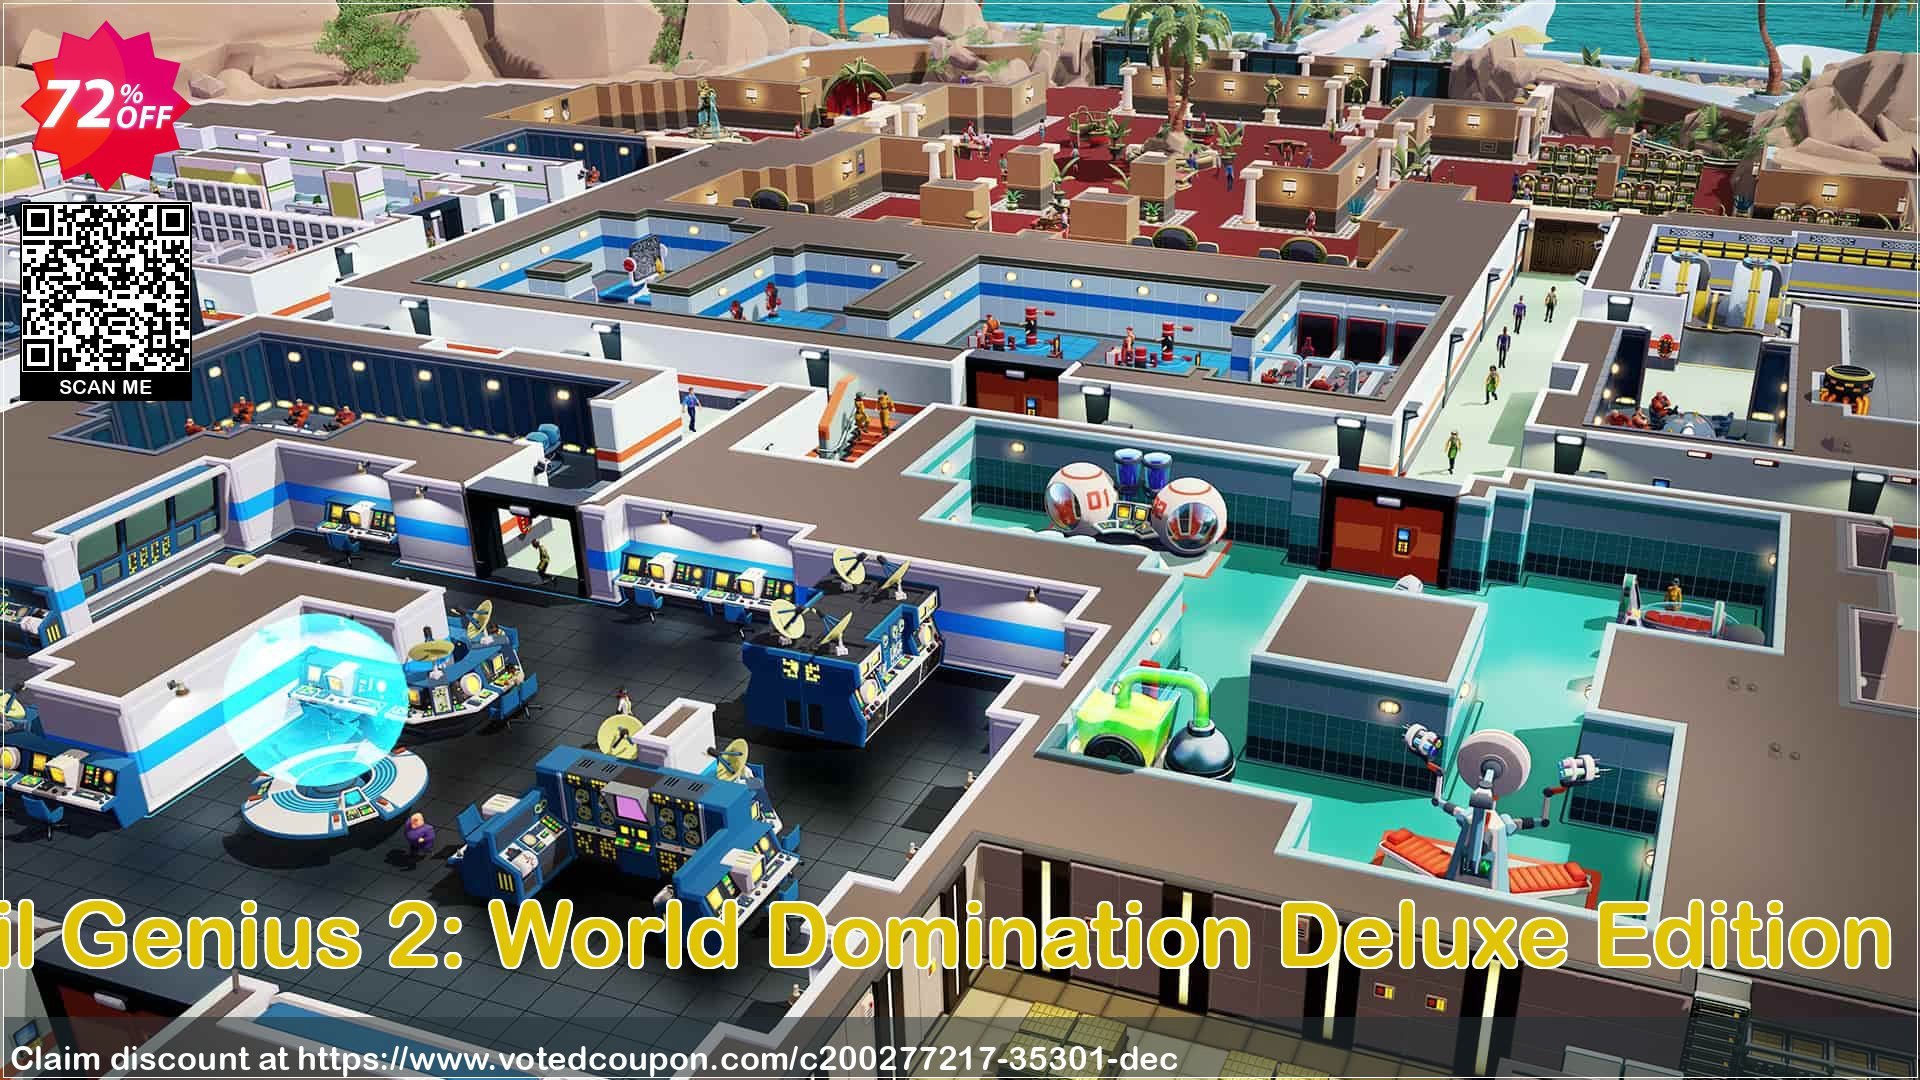 Evil Genius 2: World Domination Deluxe Edition PC Coupon Code Apr 2024, 72% OFF - VotedCoupon